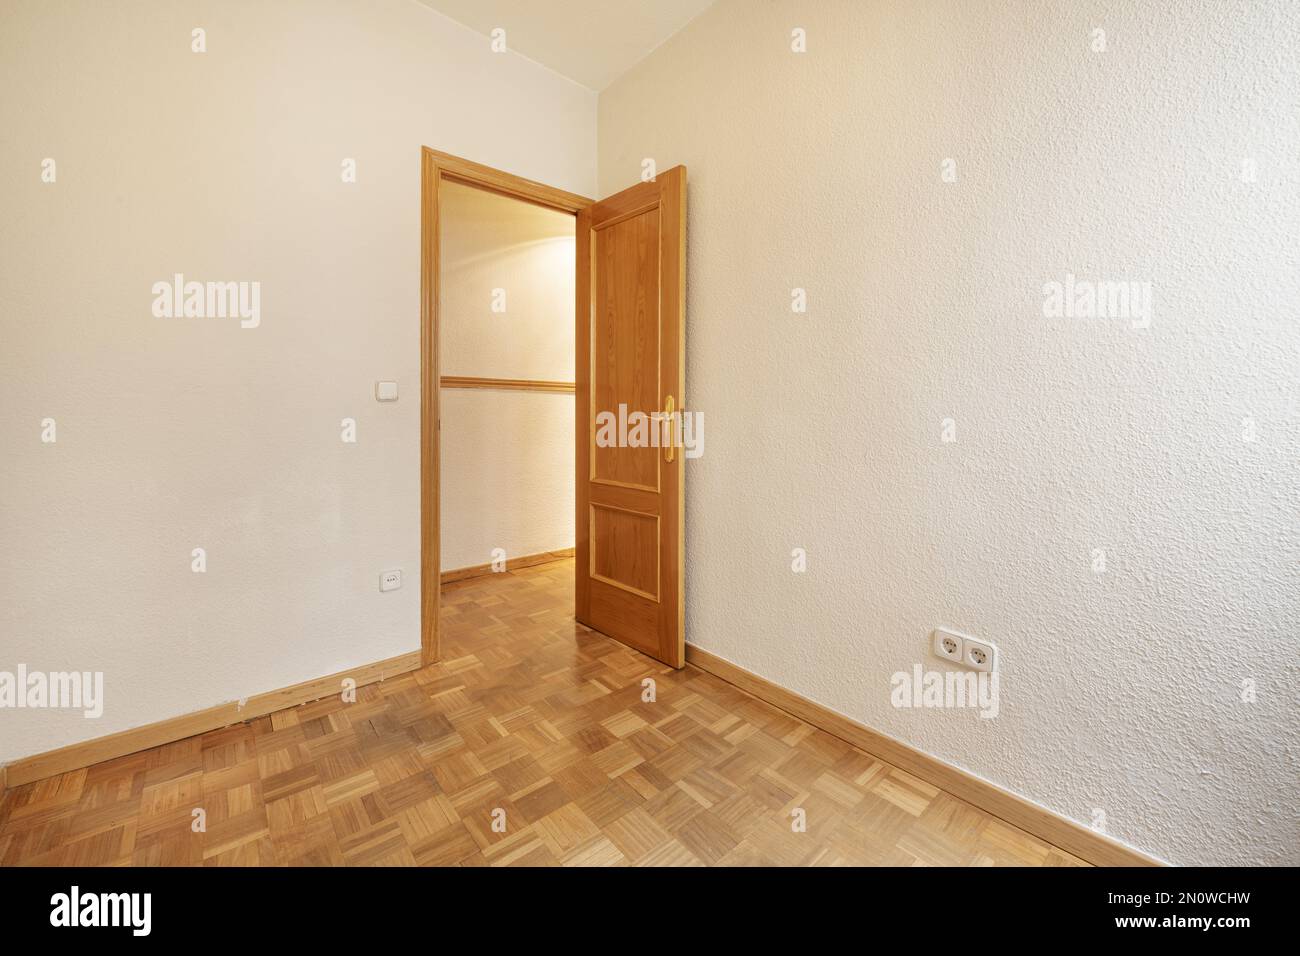 Empty room with gotelet white painted walls, oak wooden doors and matching skirting boards and oak parquet slatted floors laid in a checkerboard patte Stock Photo